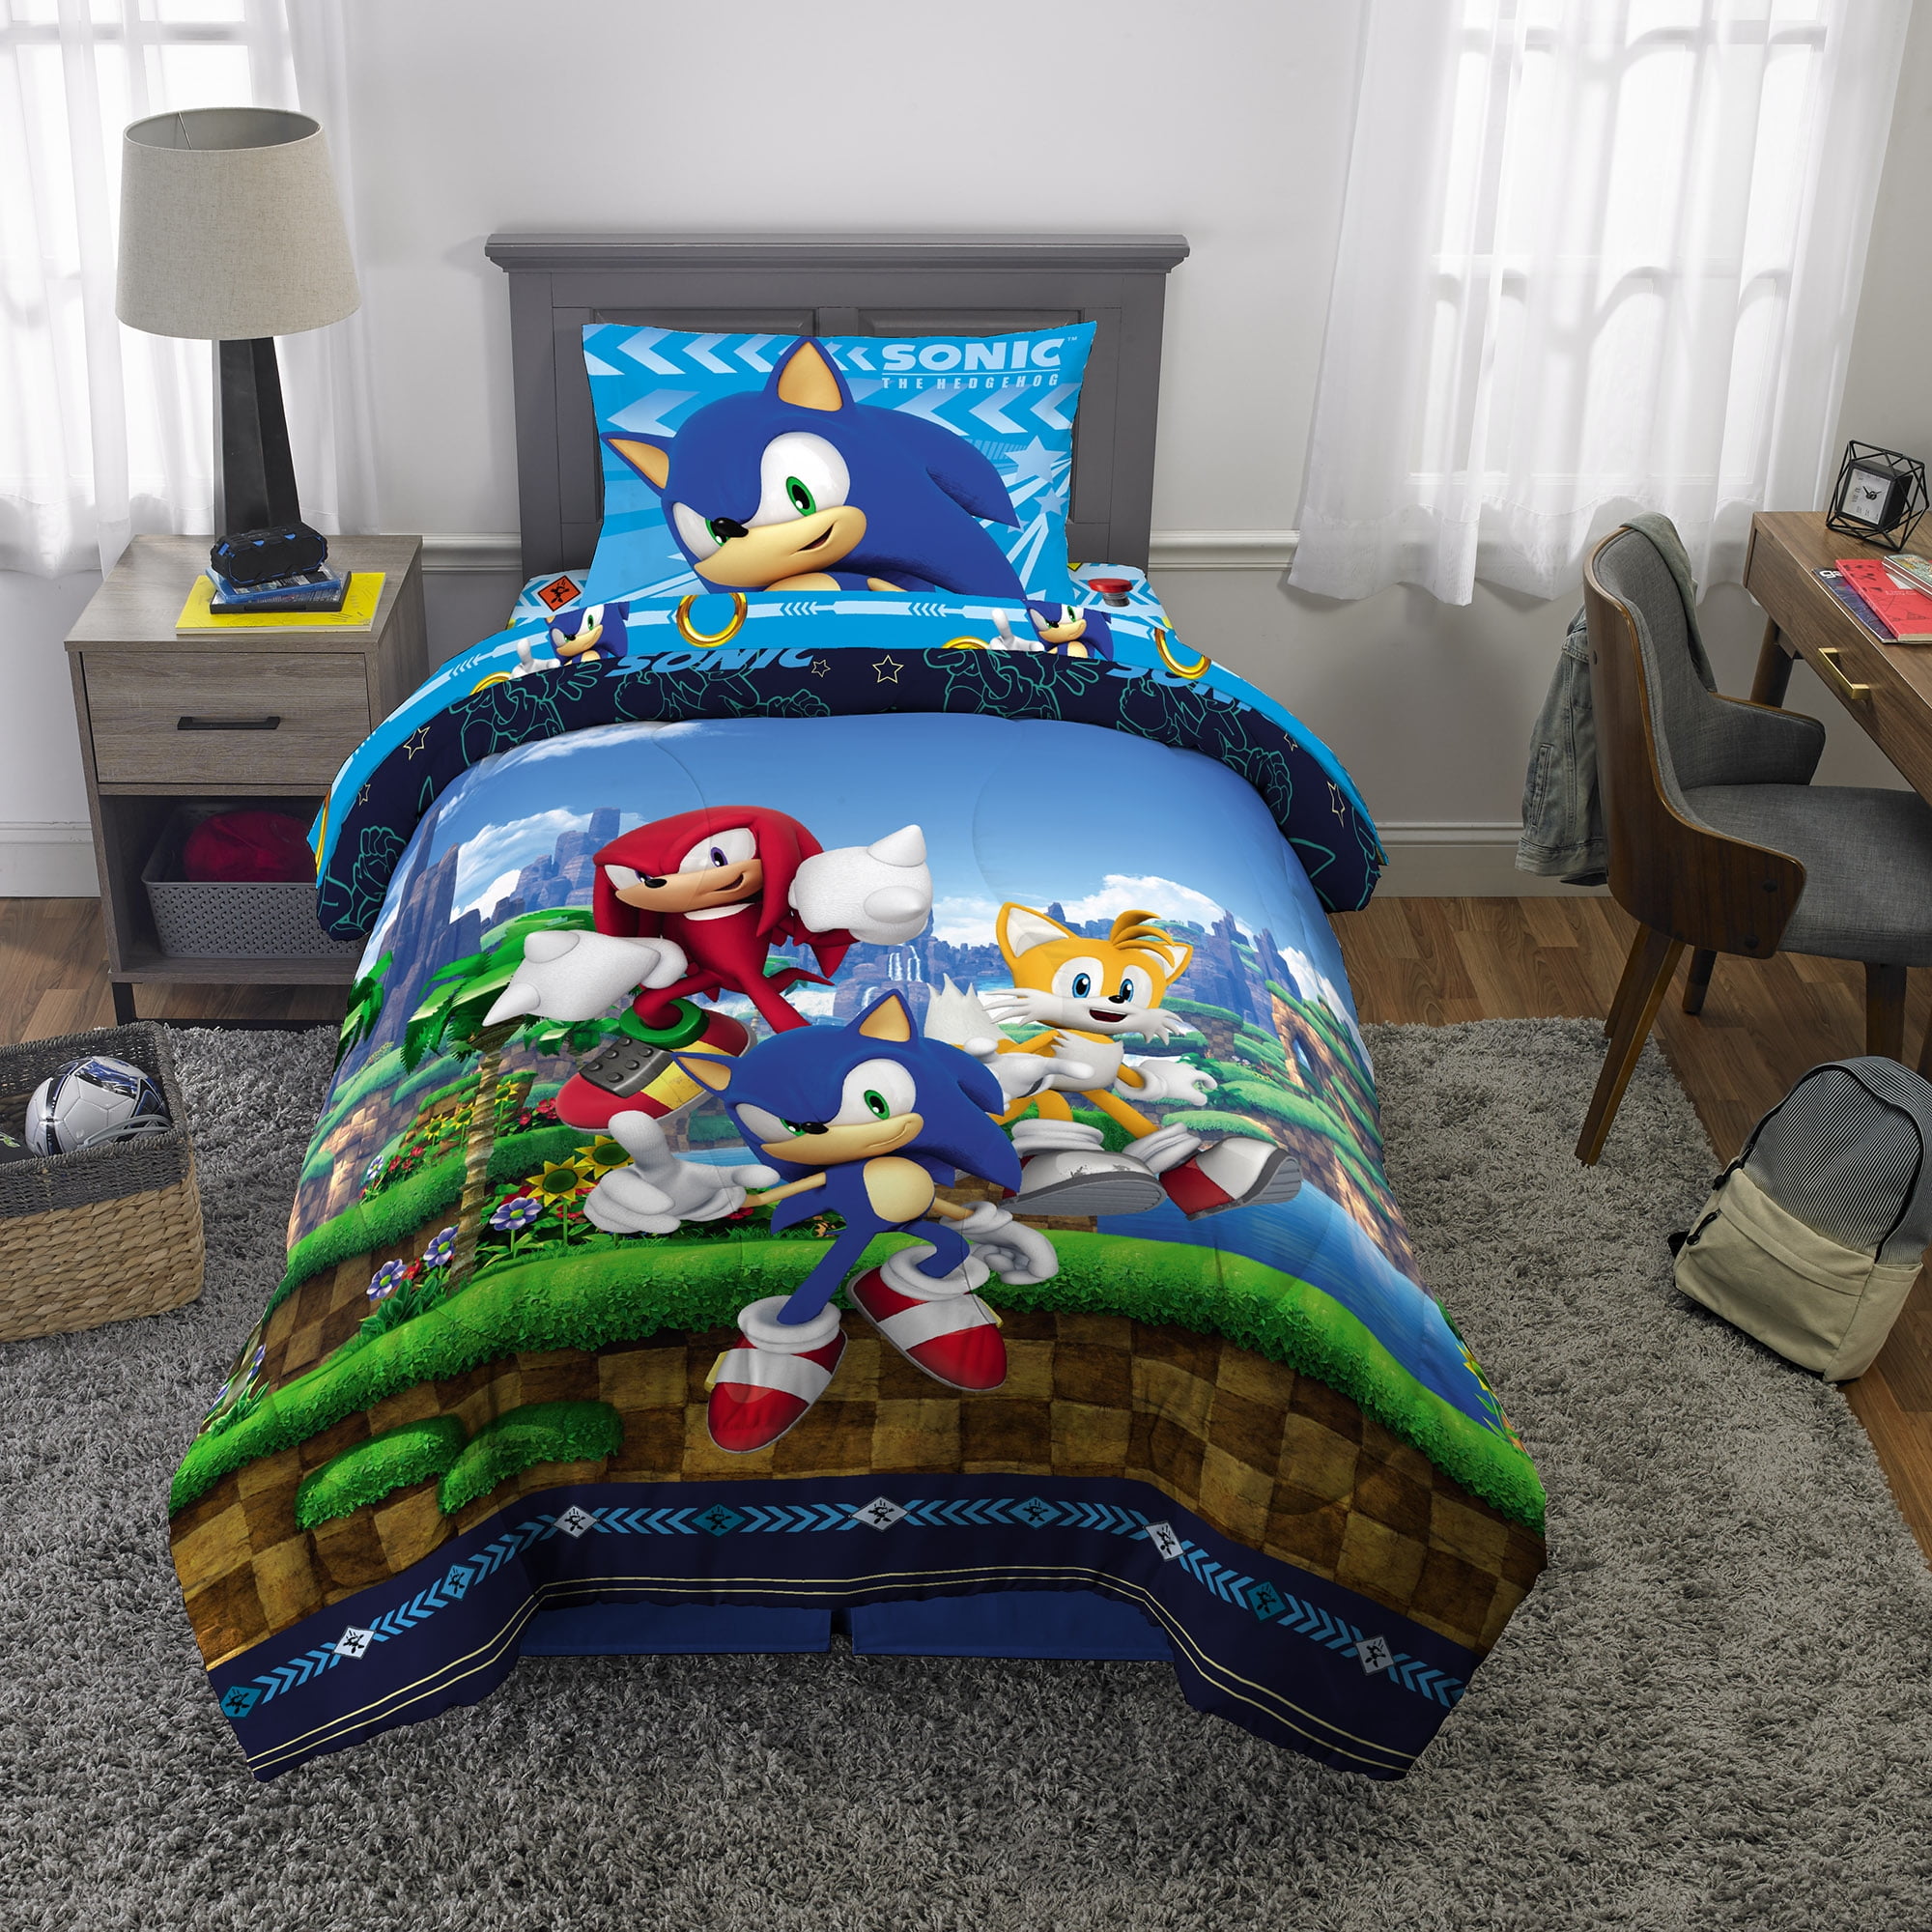 Sonic 4 Piece Twin Size Franco Kids Bedding Super Soft Comforter and Sheet Set 